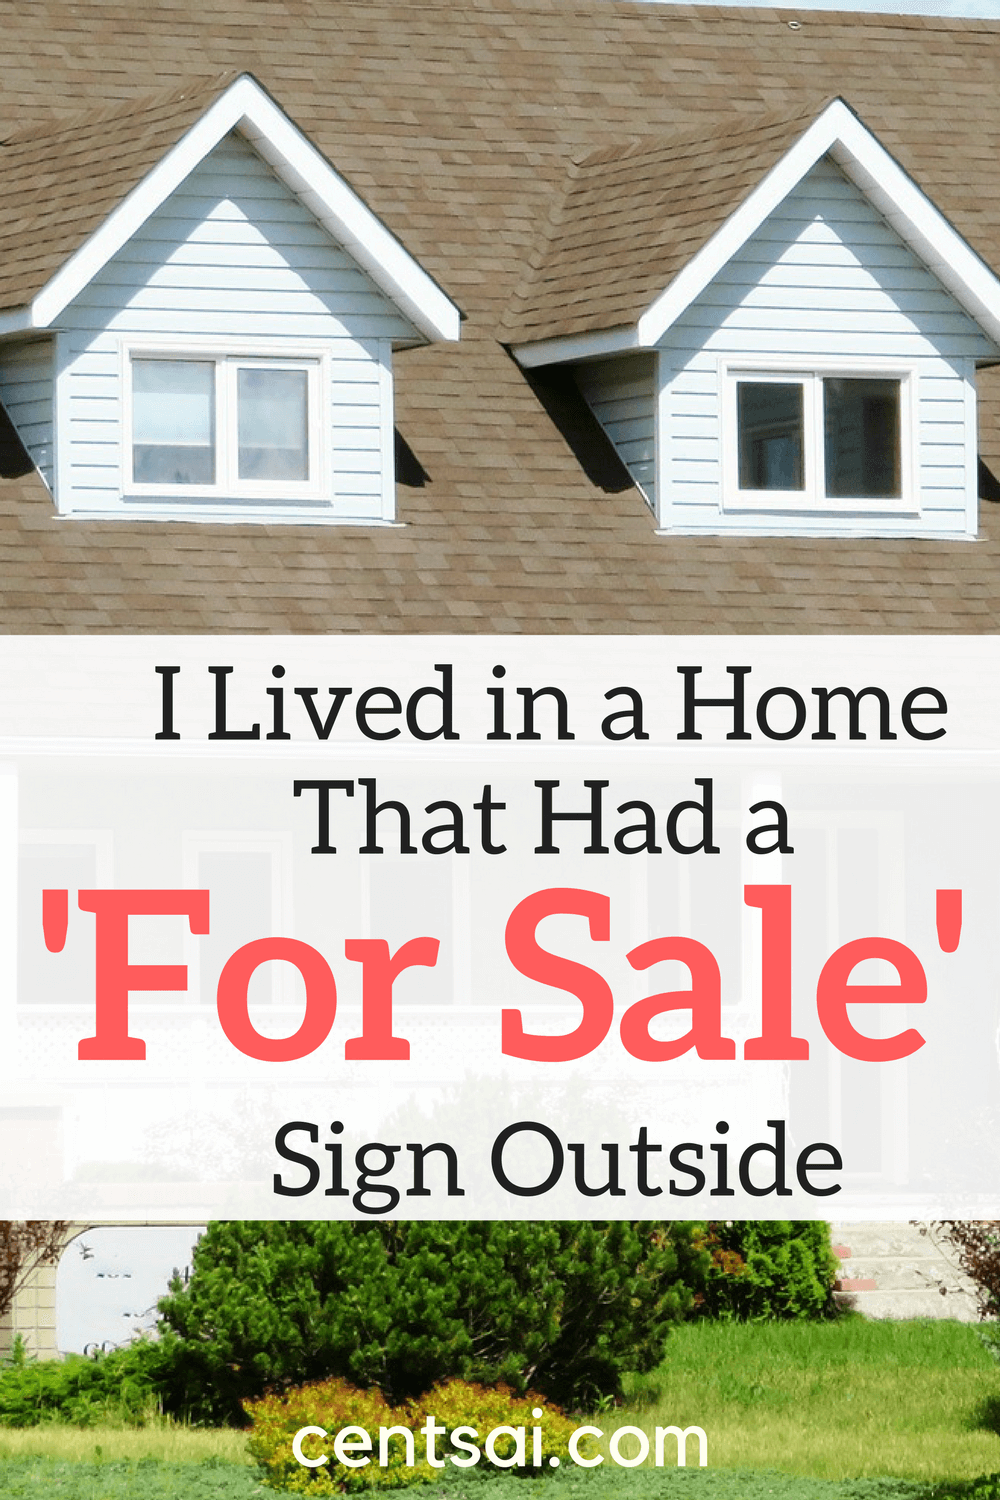 I Lived in a Home That Had a ‘For Sale’ Sign Outside